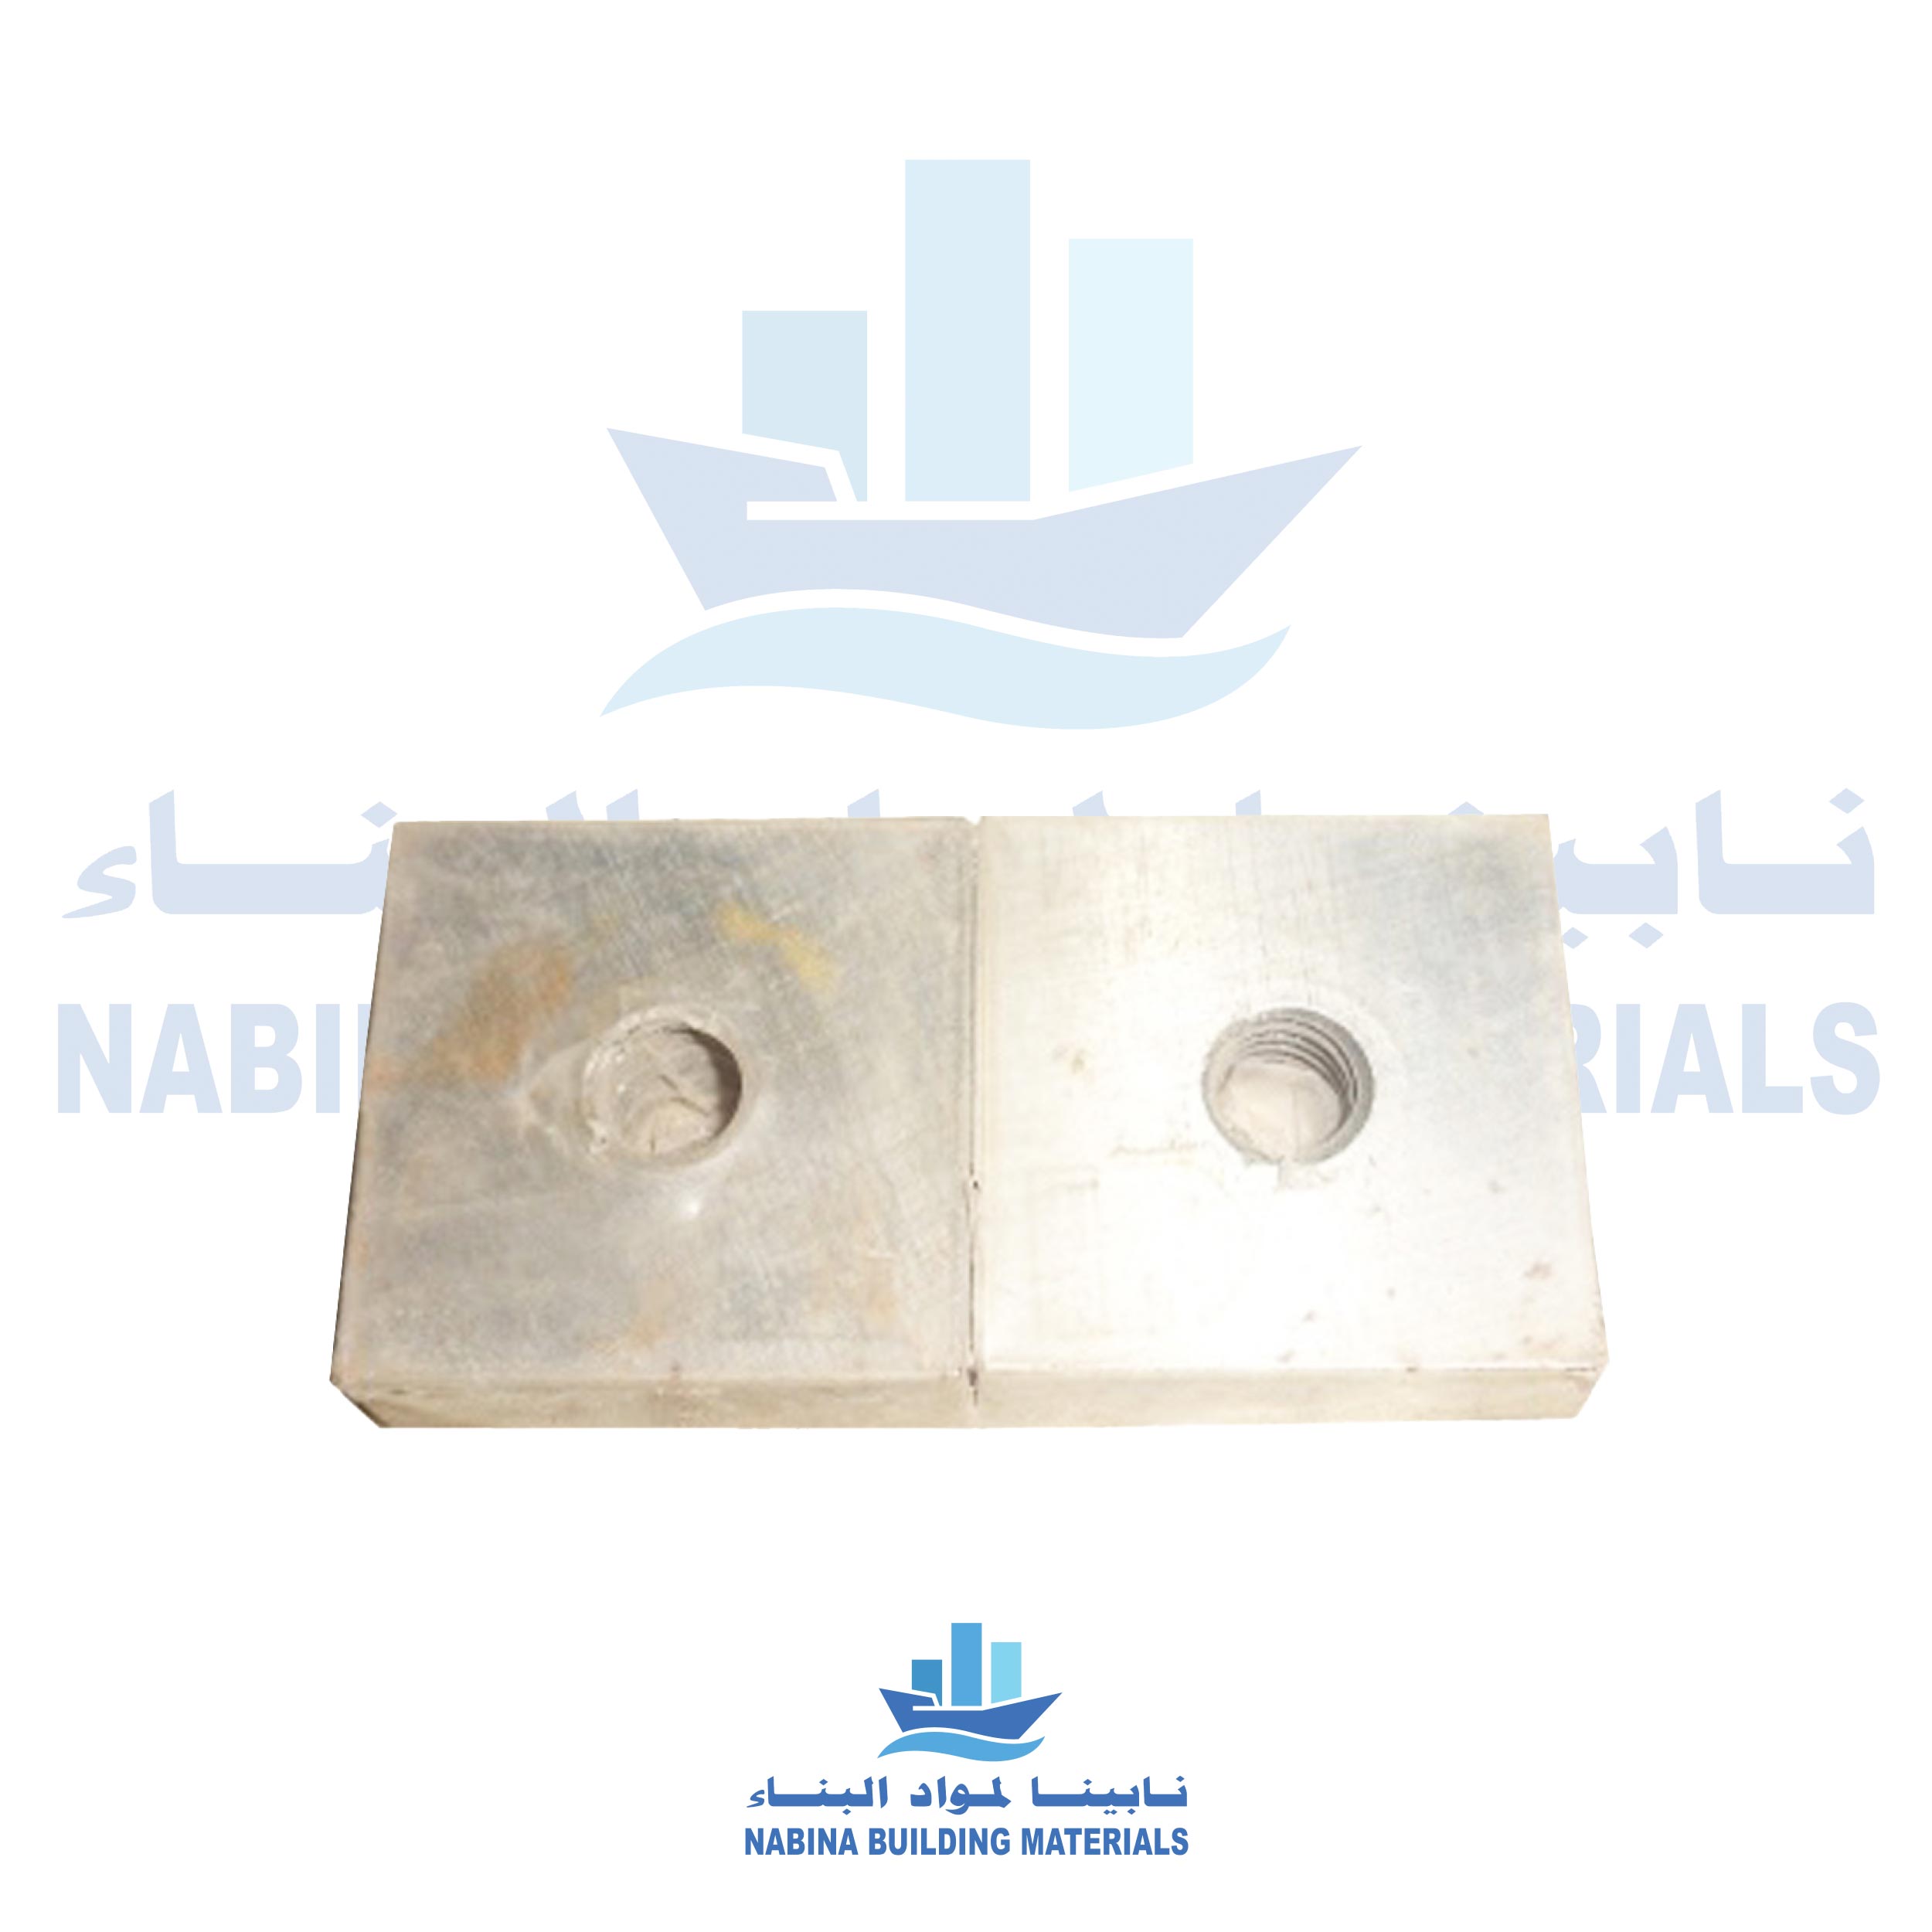 Nabina-Building-Materials-pipe-support